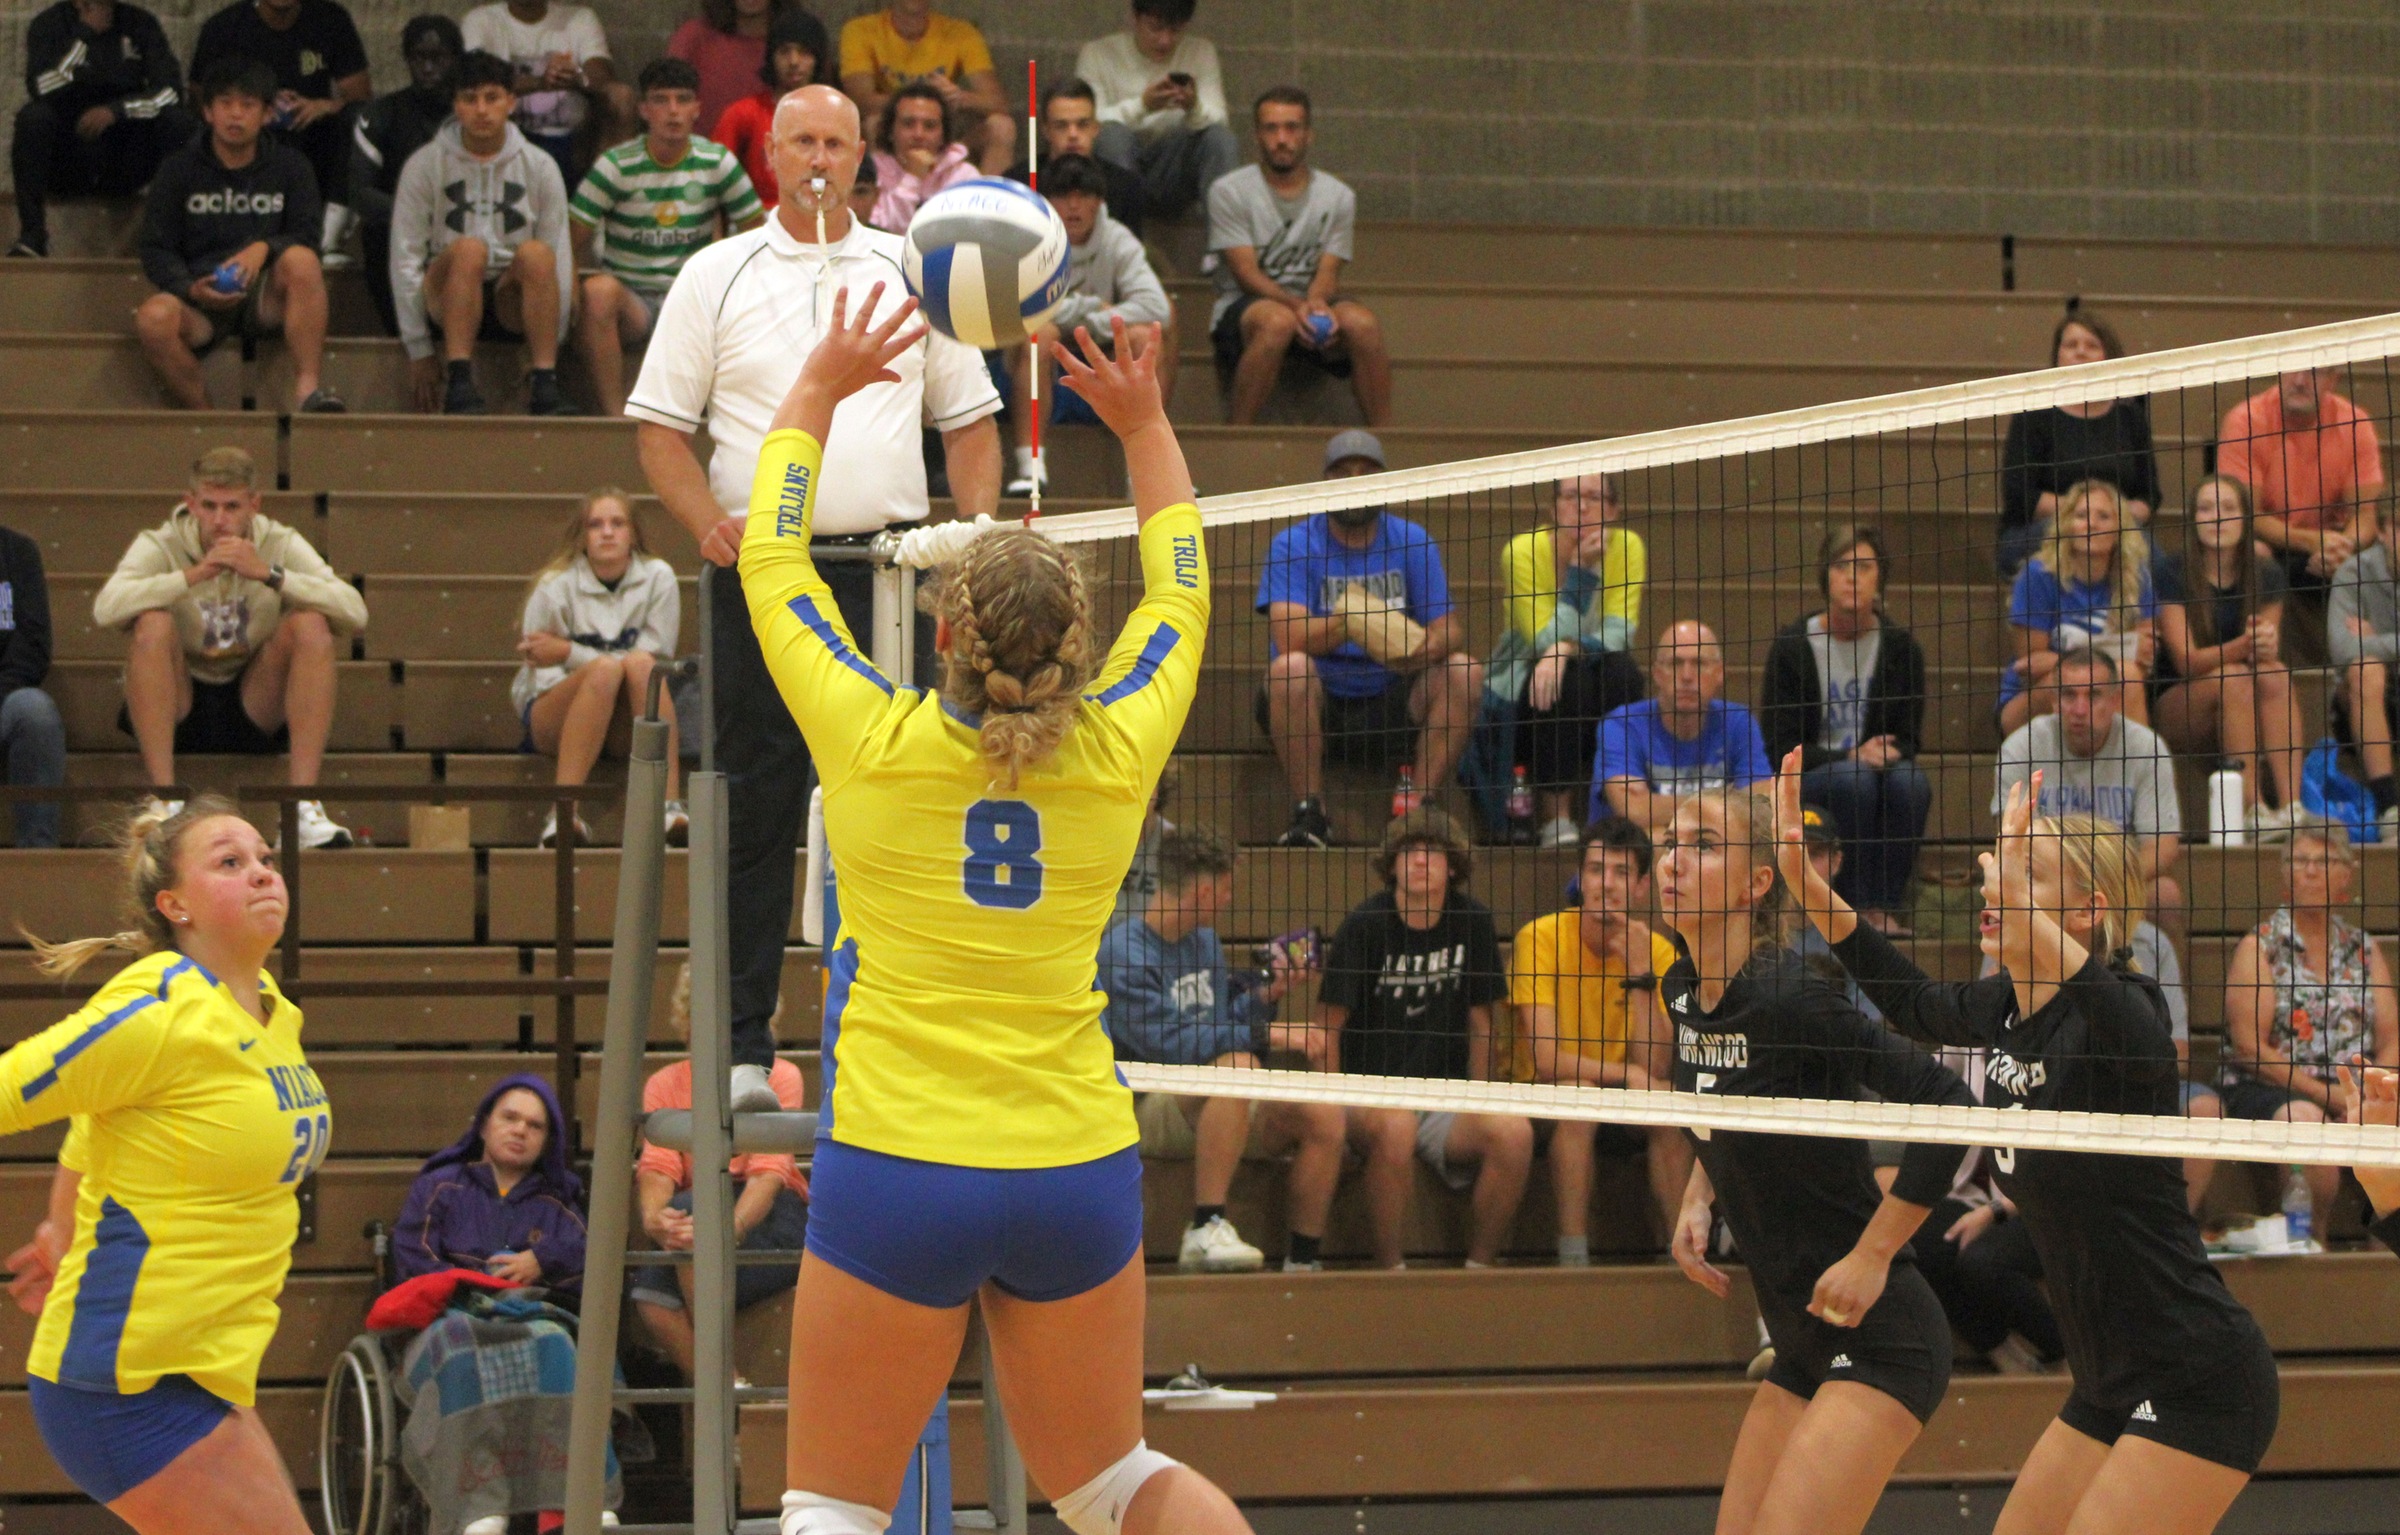 NIACC sophomore Ryley Wetlaufer sets the ball in Wednesday's ICCAC match against Kirkwood.